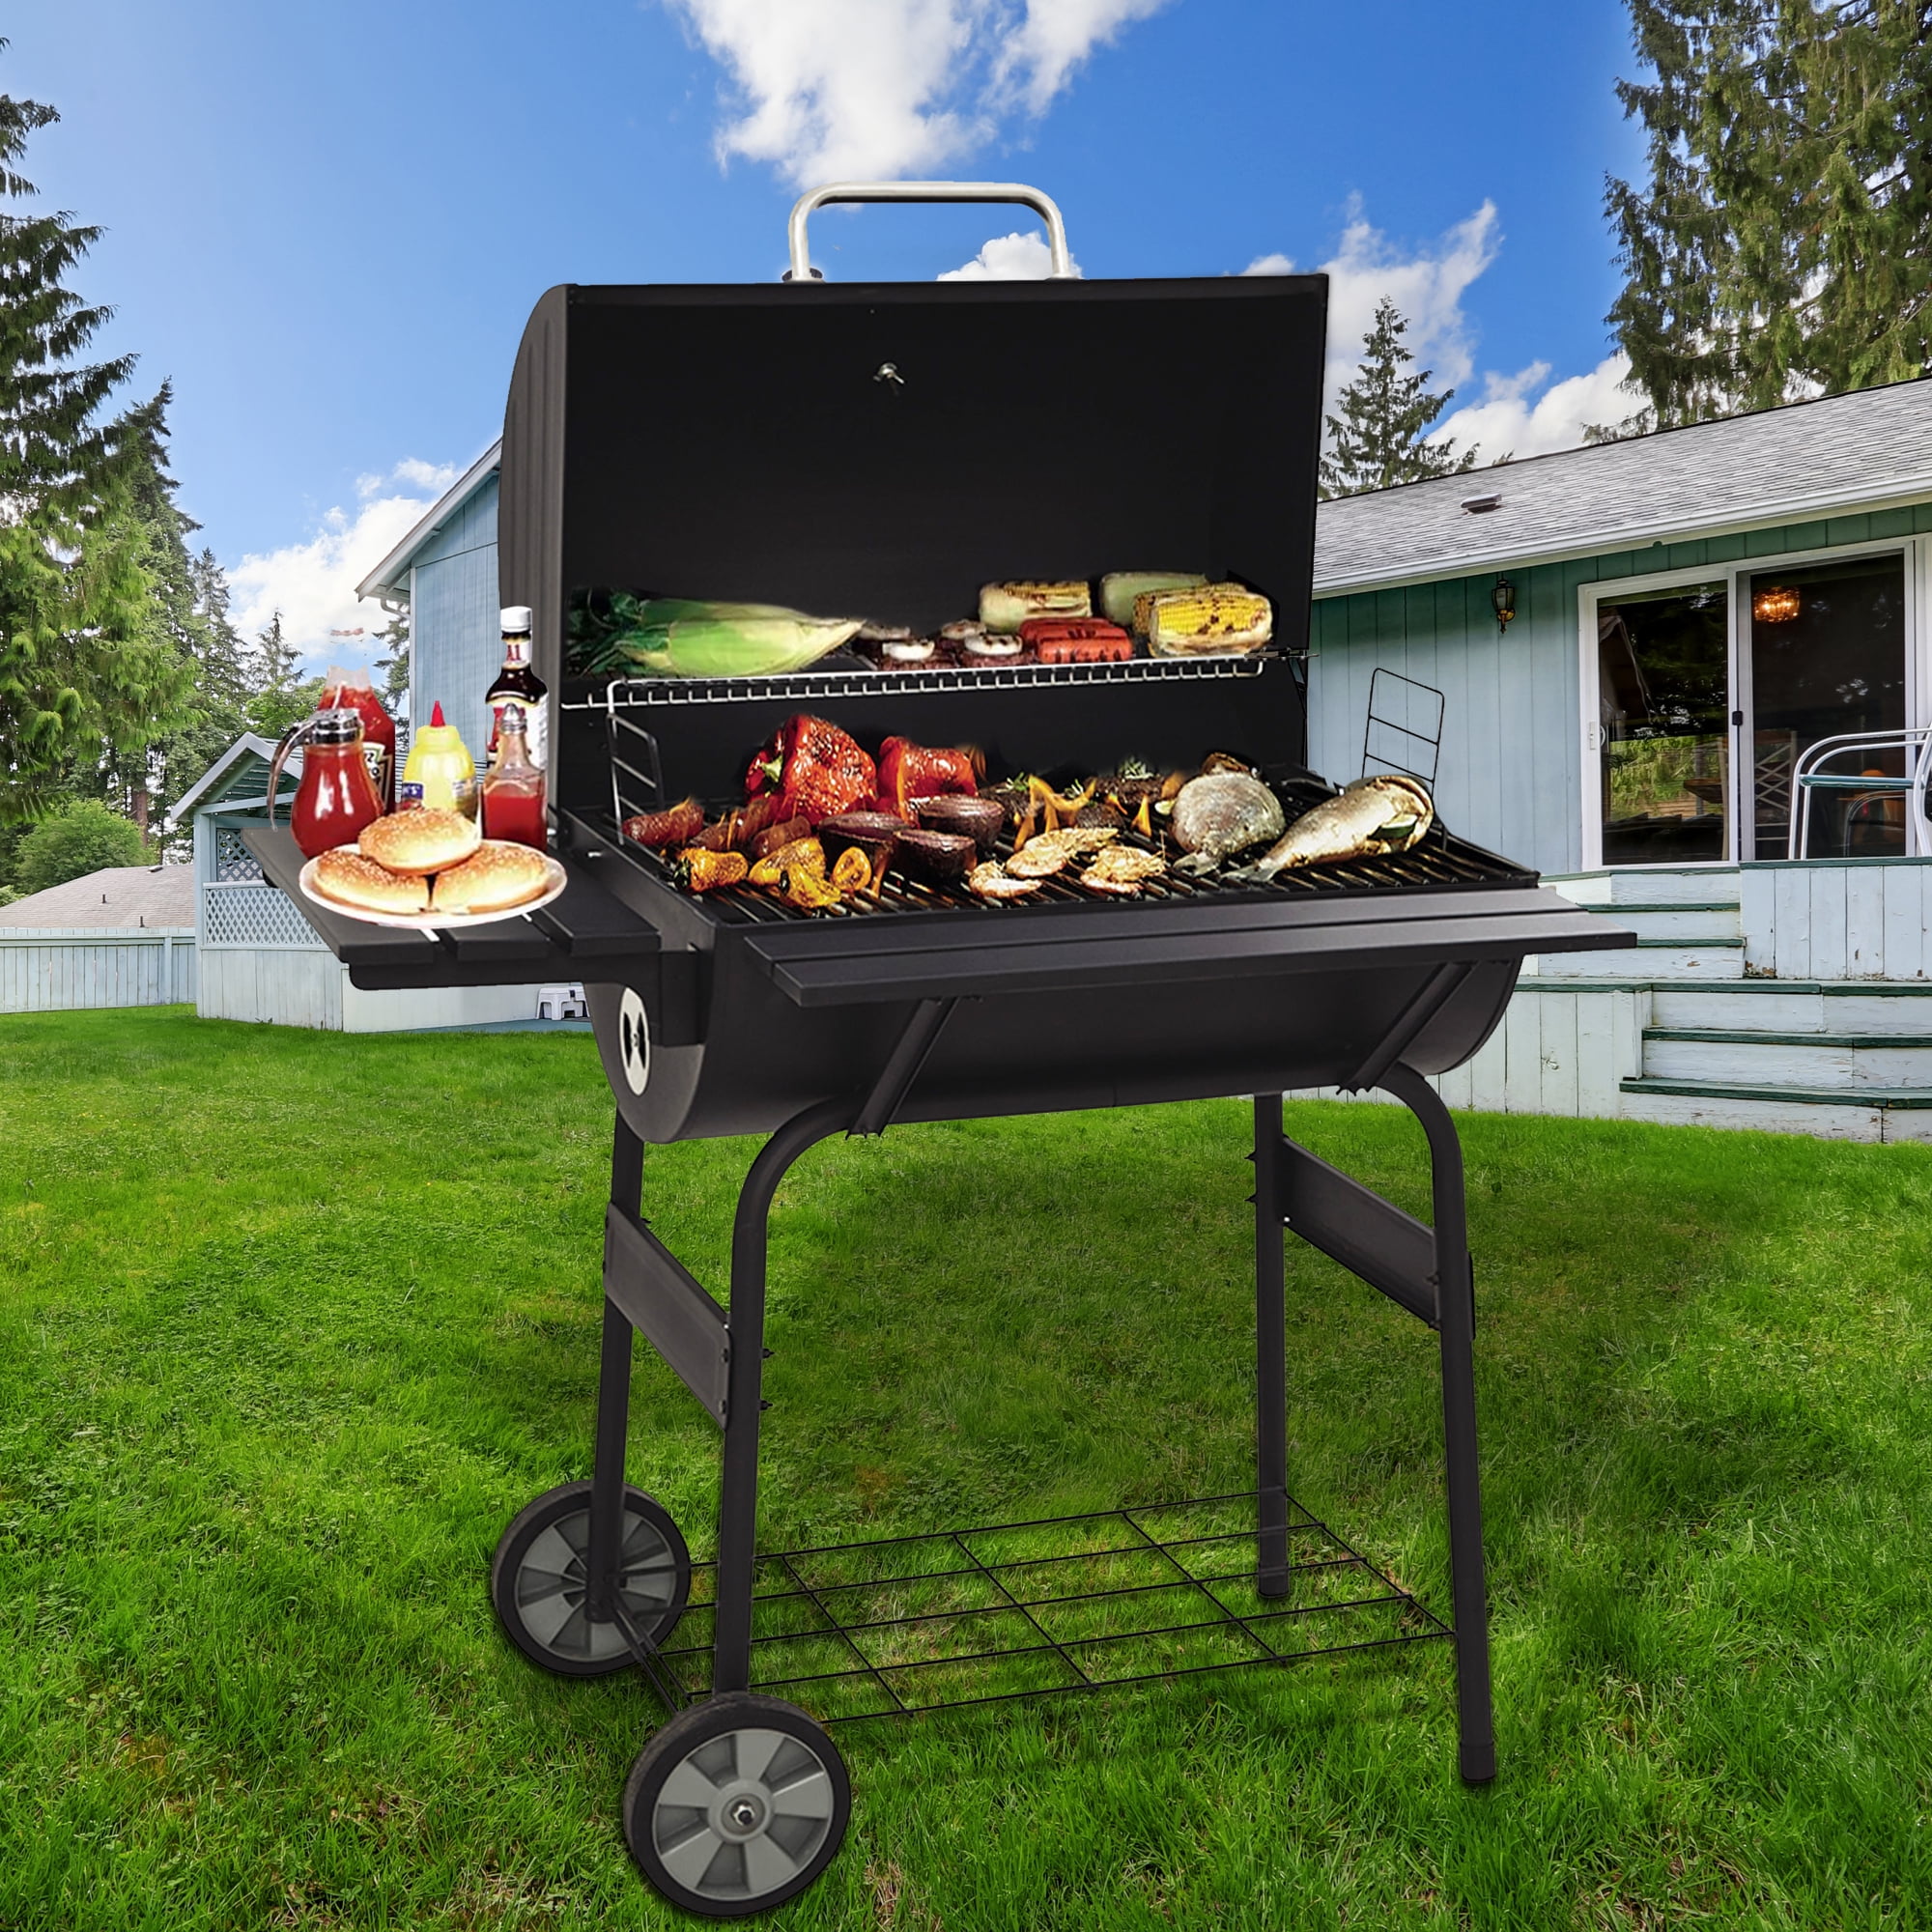 ALL STEEL BBQ CHARCOAL GARDEN BARBECUE BLACK ADJUSTABLE GRILL PRIMA 